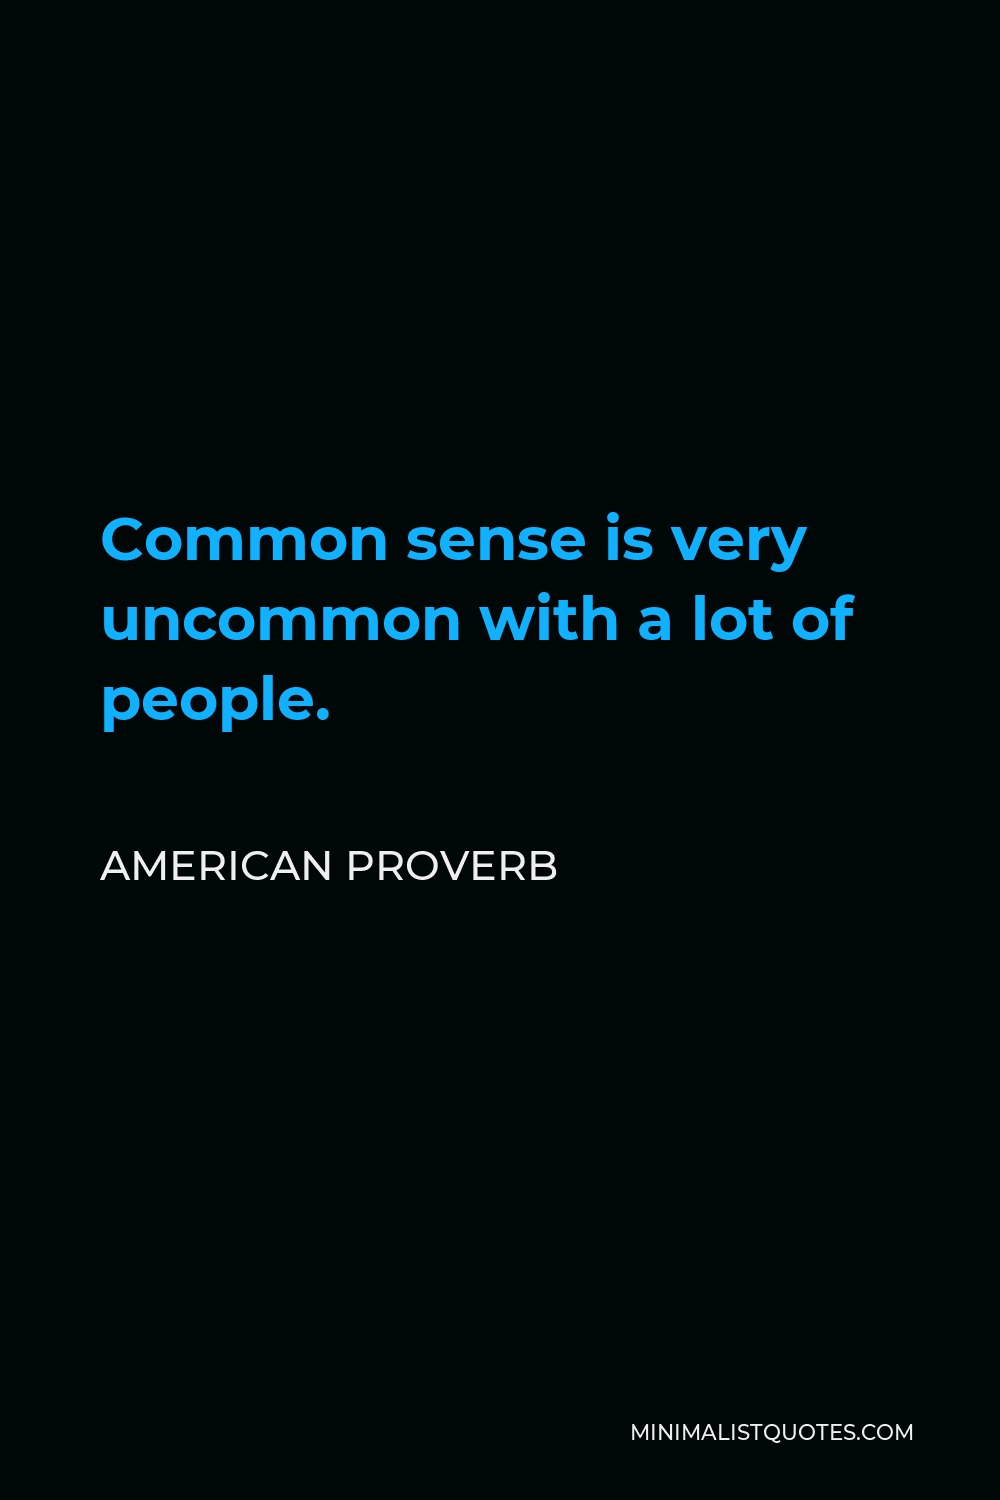 American Proverb Quote - Common sense is very uncommon with a lot of people.